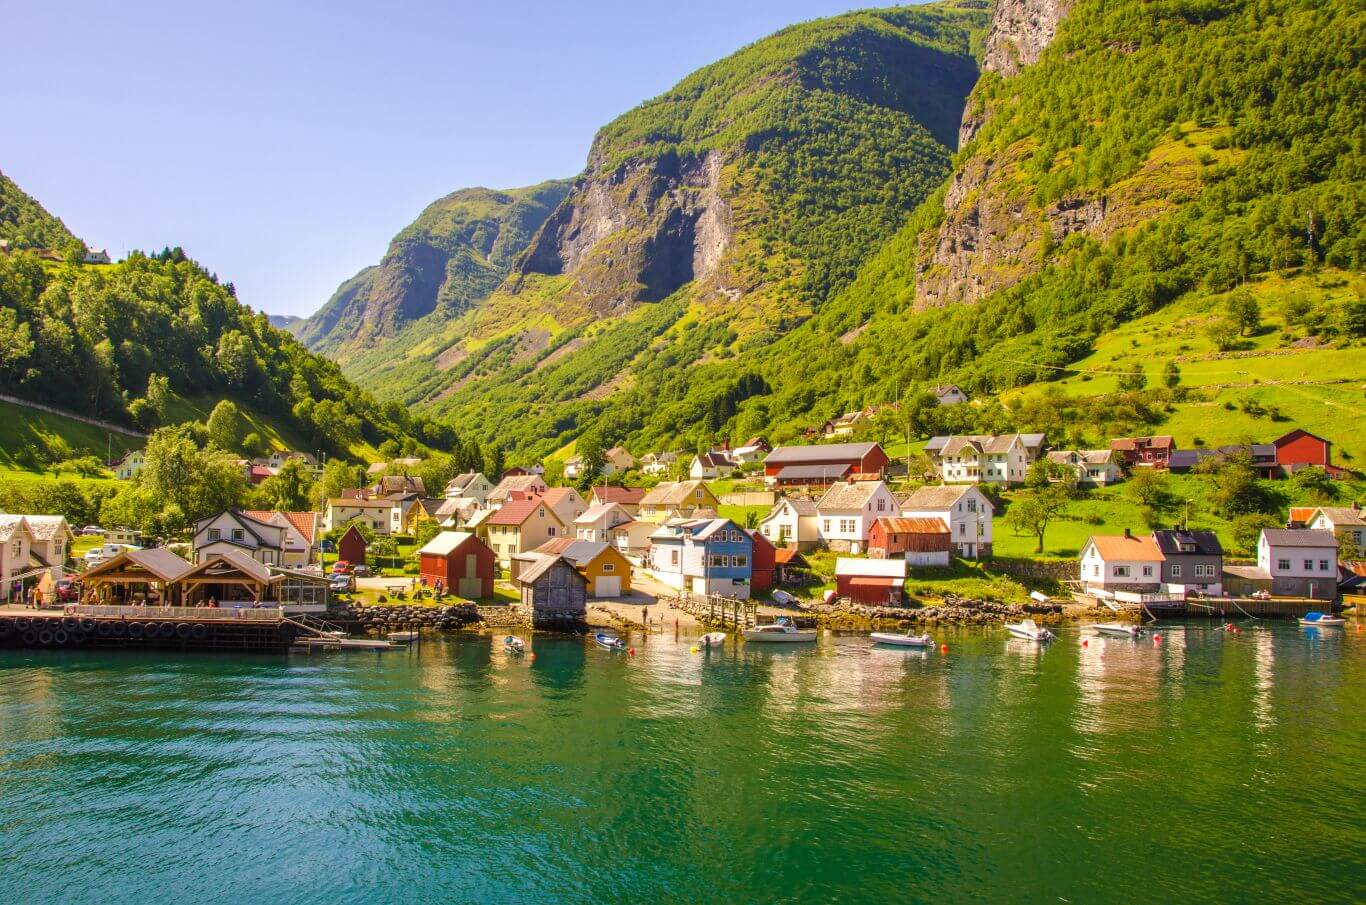 Win a Holland America Line cruise to Norway with IGLU Cruise